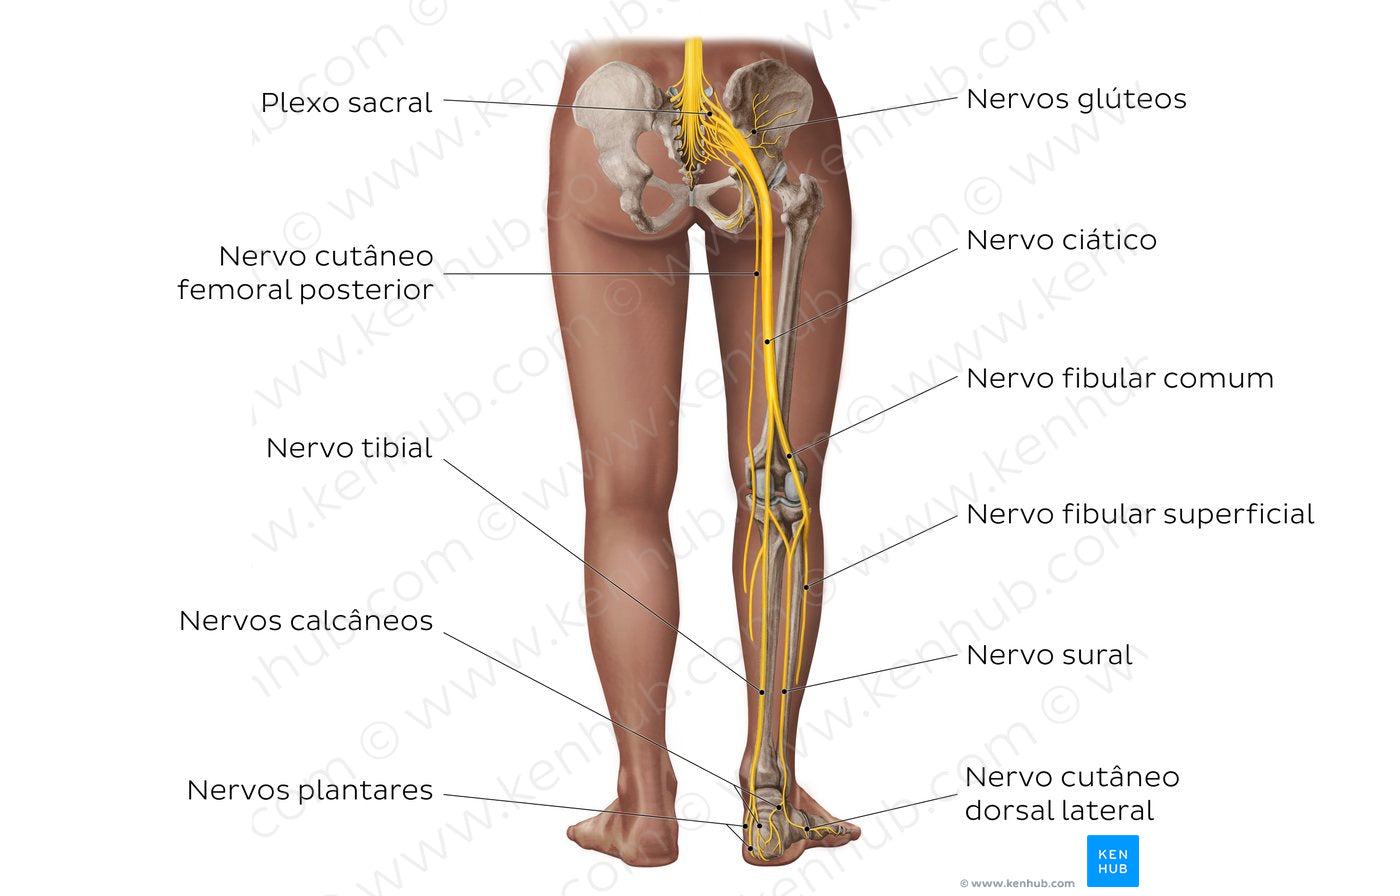 Main nerves of the lower limb - posterior (Portuguese)